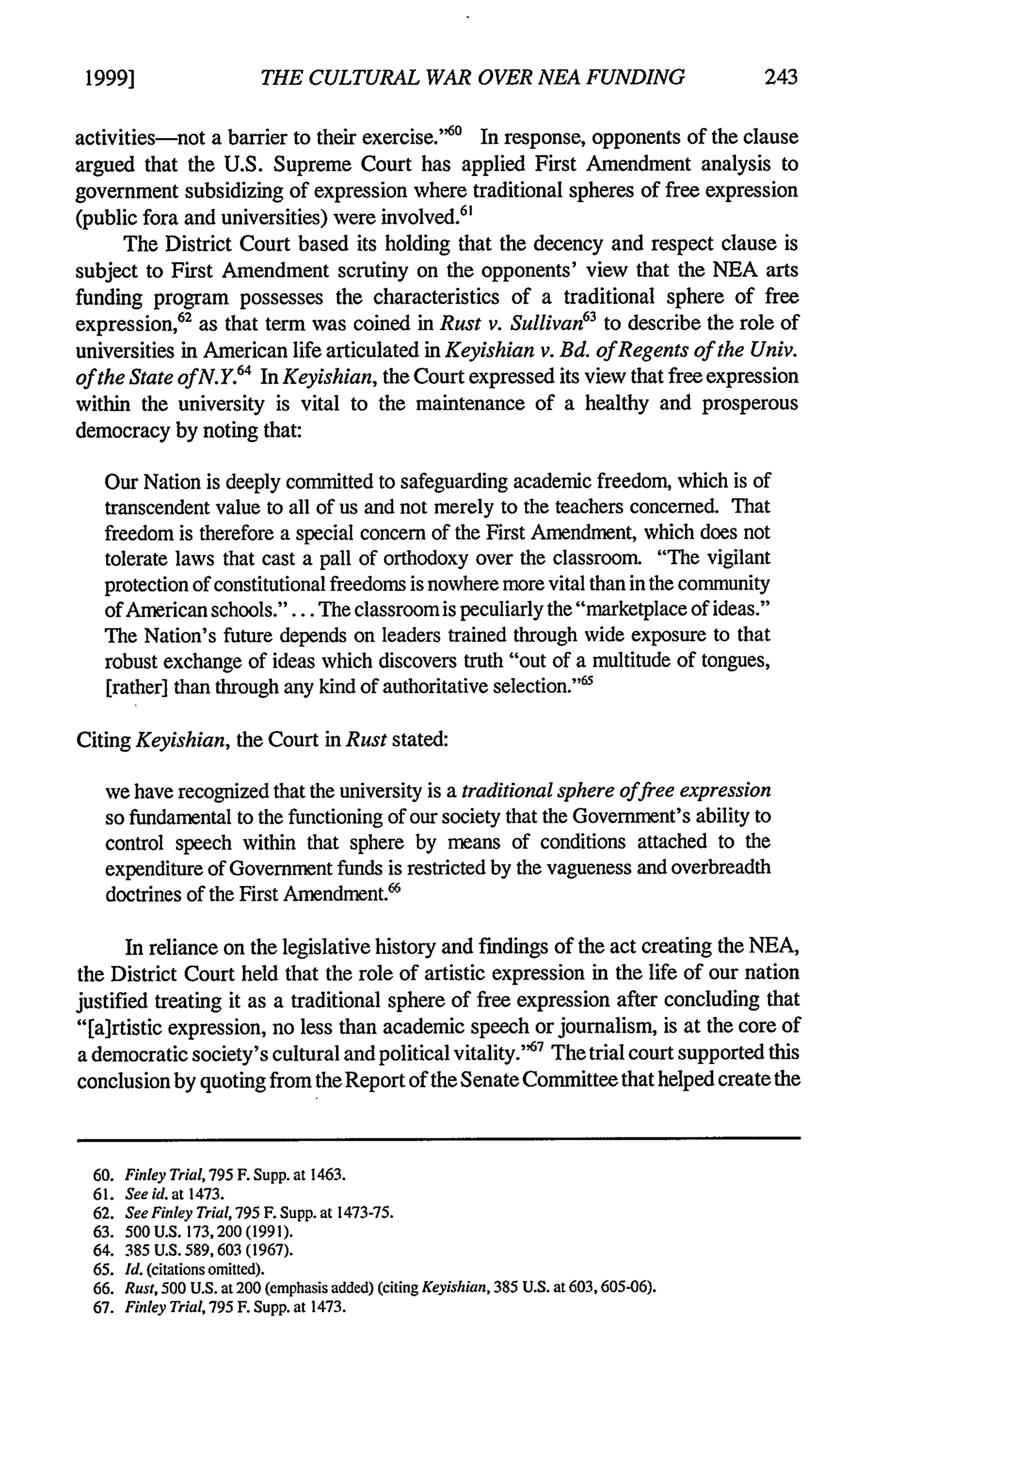 1999] Allison: The Cultural War over NEA Funding: Illogical Statutory Deconstruc THE CULTURAL WAR OVER NEA FUNDING activities-not a barrier to their exercise.